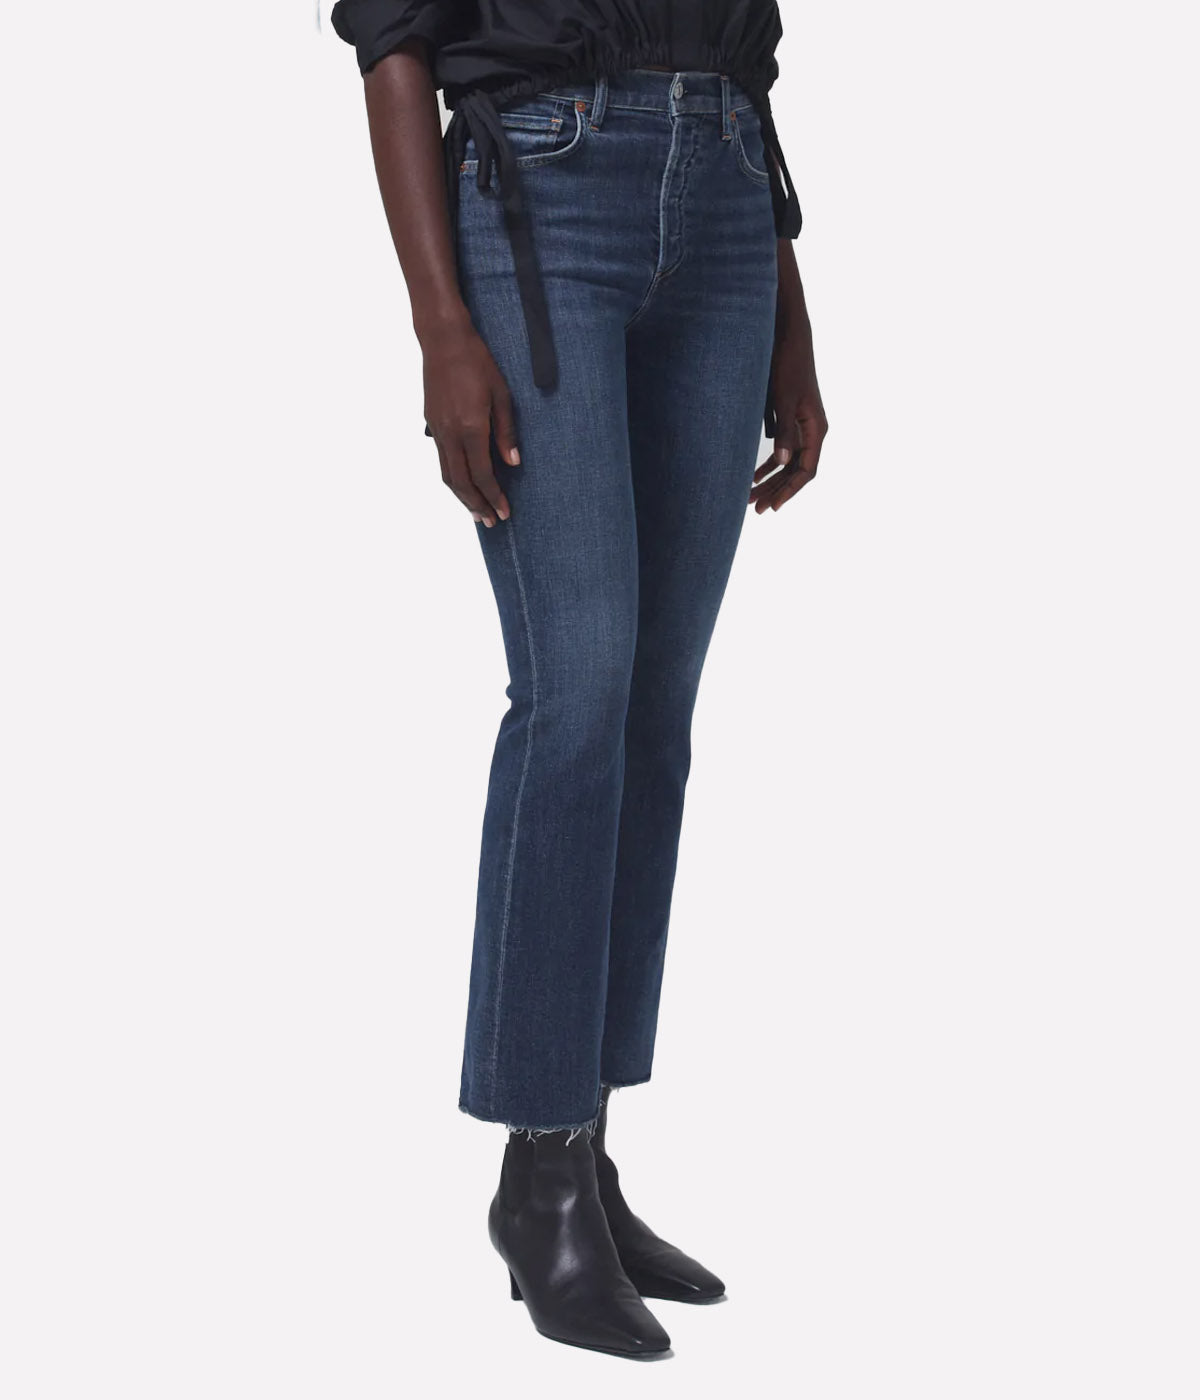 Isola Cropped Boot Jean in Undercurrent